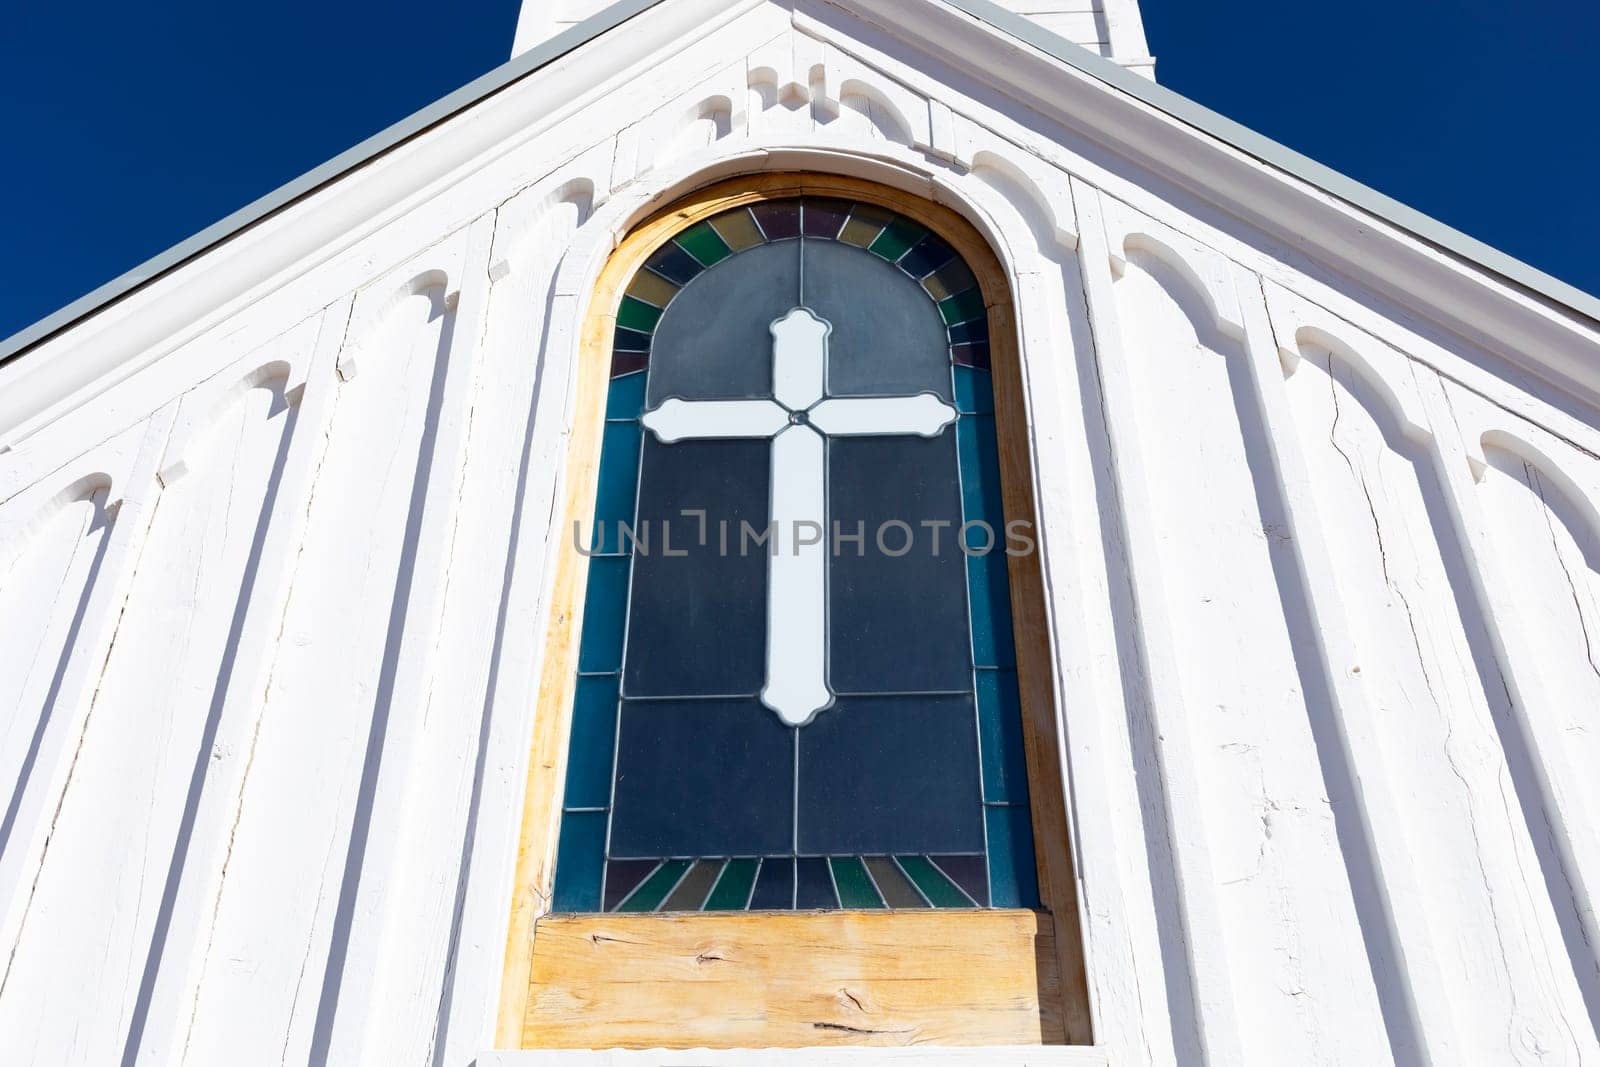 Wooden White Church Stained glass window with Cross, Blue Sky On Background. Christian Religious Holiday Easter or Radonitsa. Horizontal Plane by netatsi